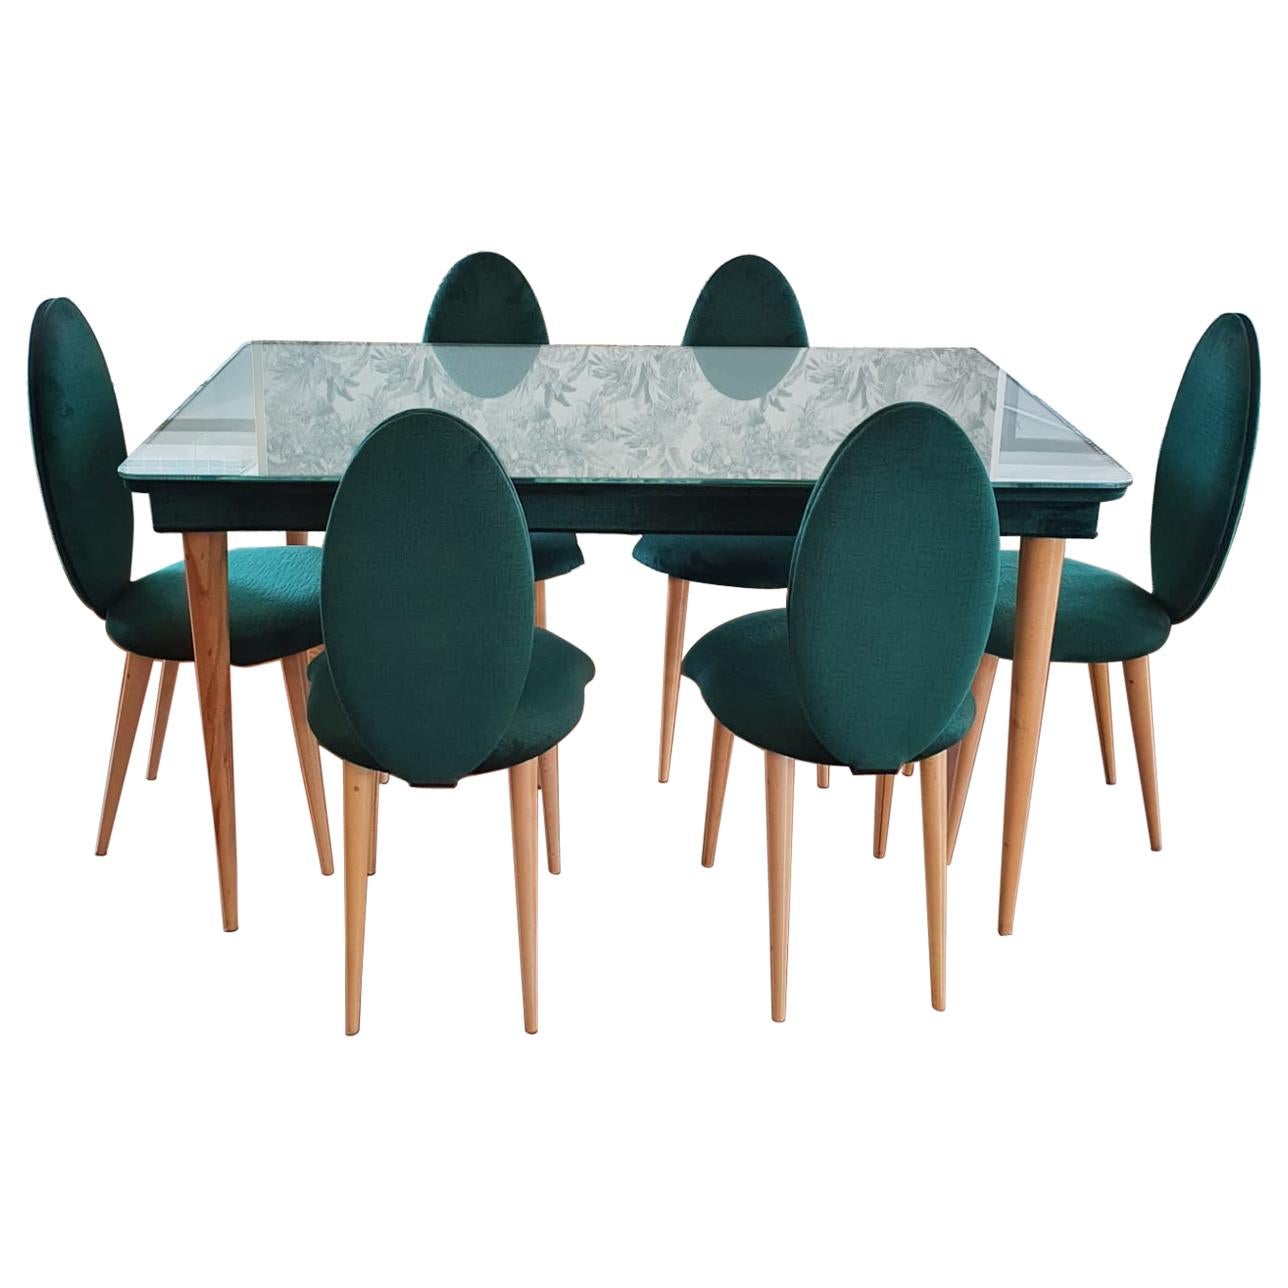 Midcentury Beech Wood and Fabric Dining Table & Six Chairs by Umberto Mascagni